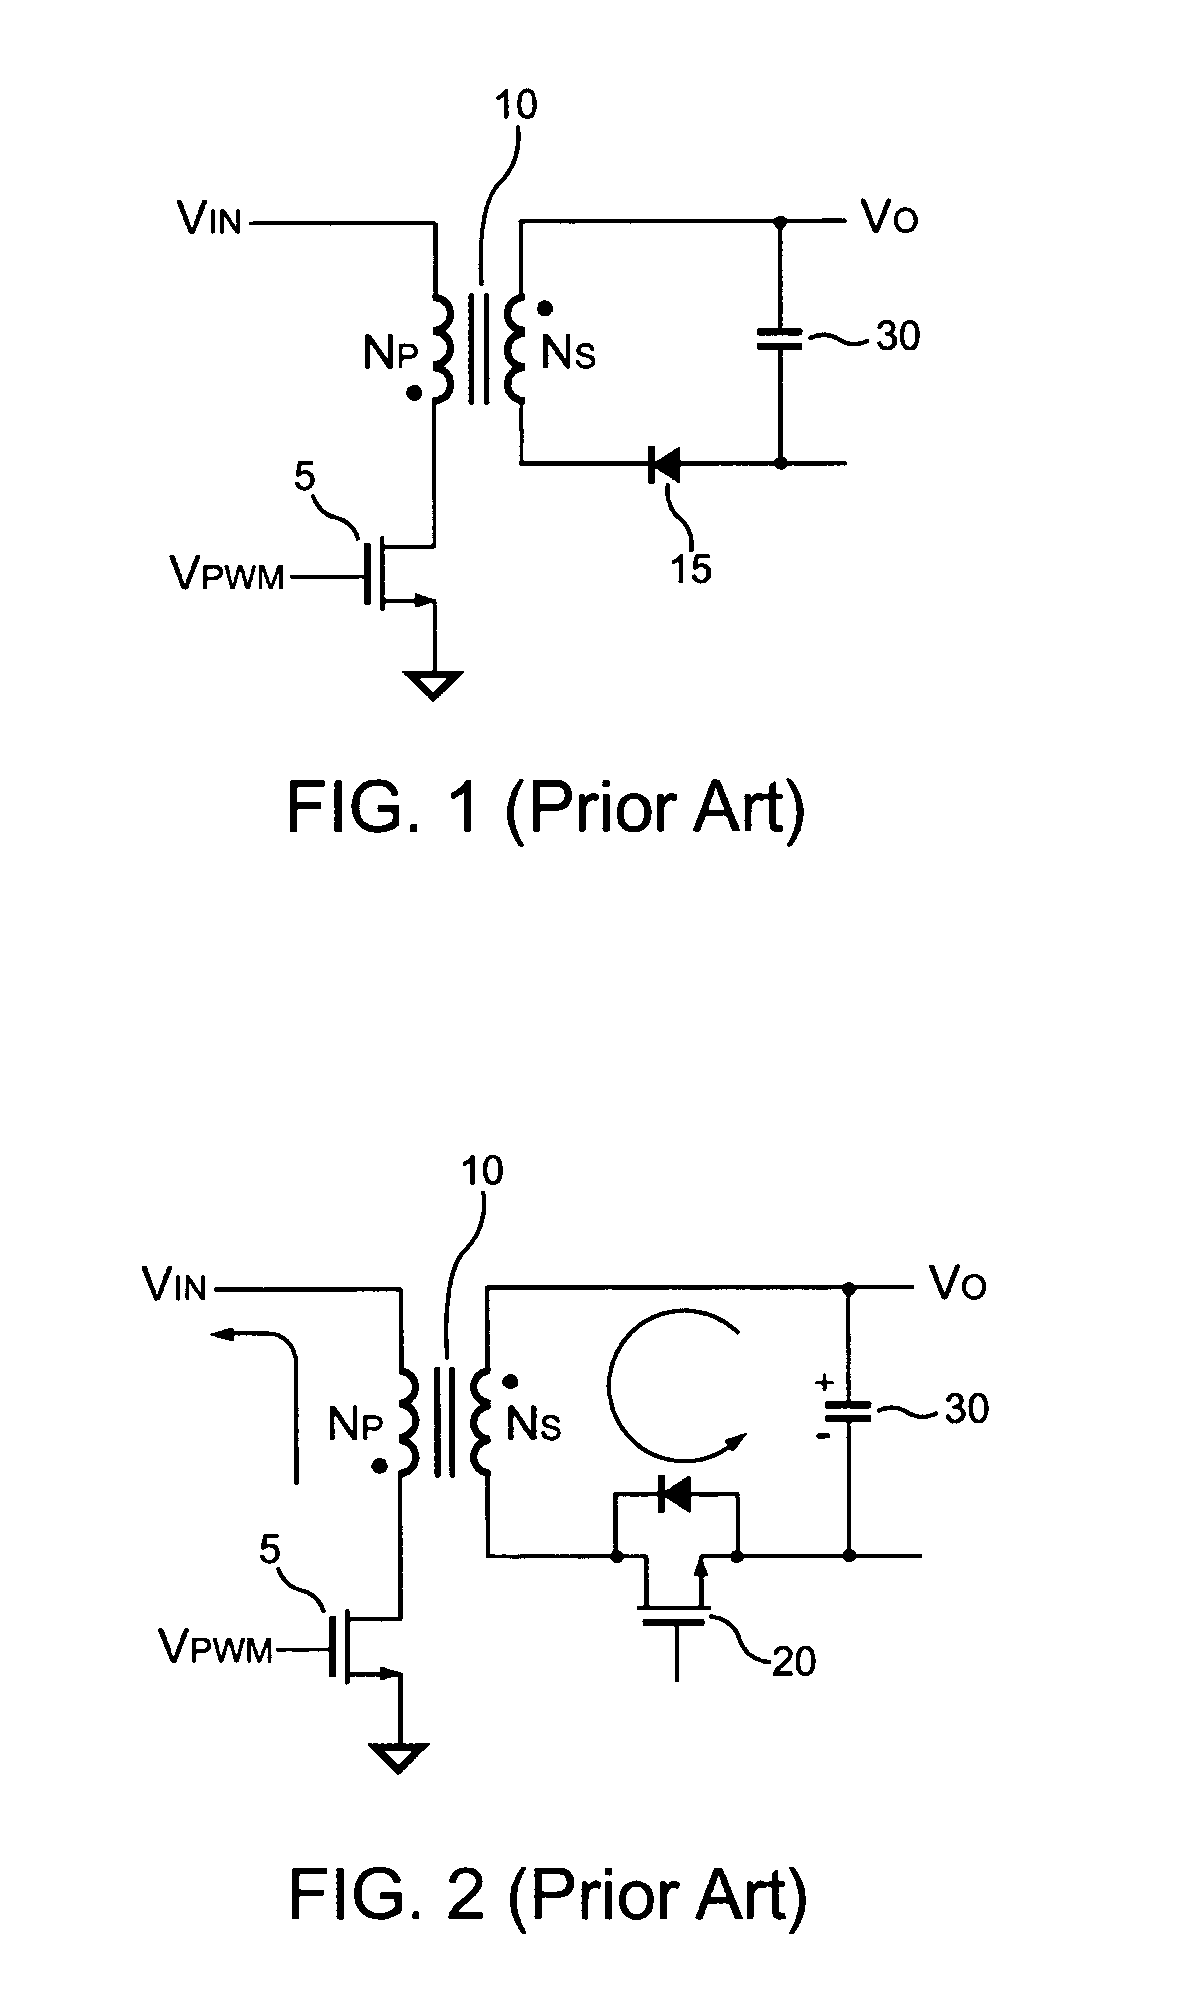 Pwm controller for synchronous rectifier of flyback power converter